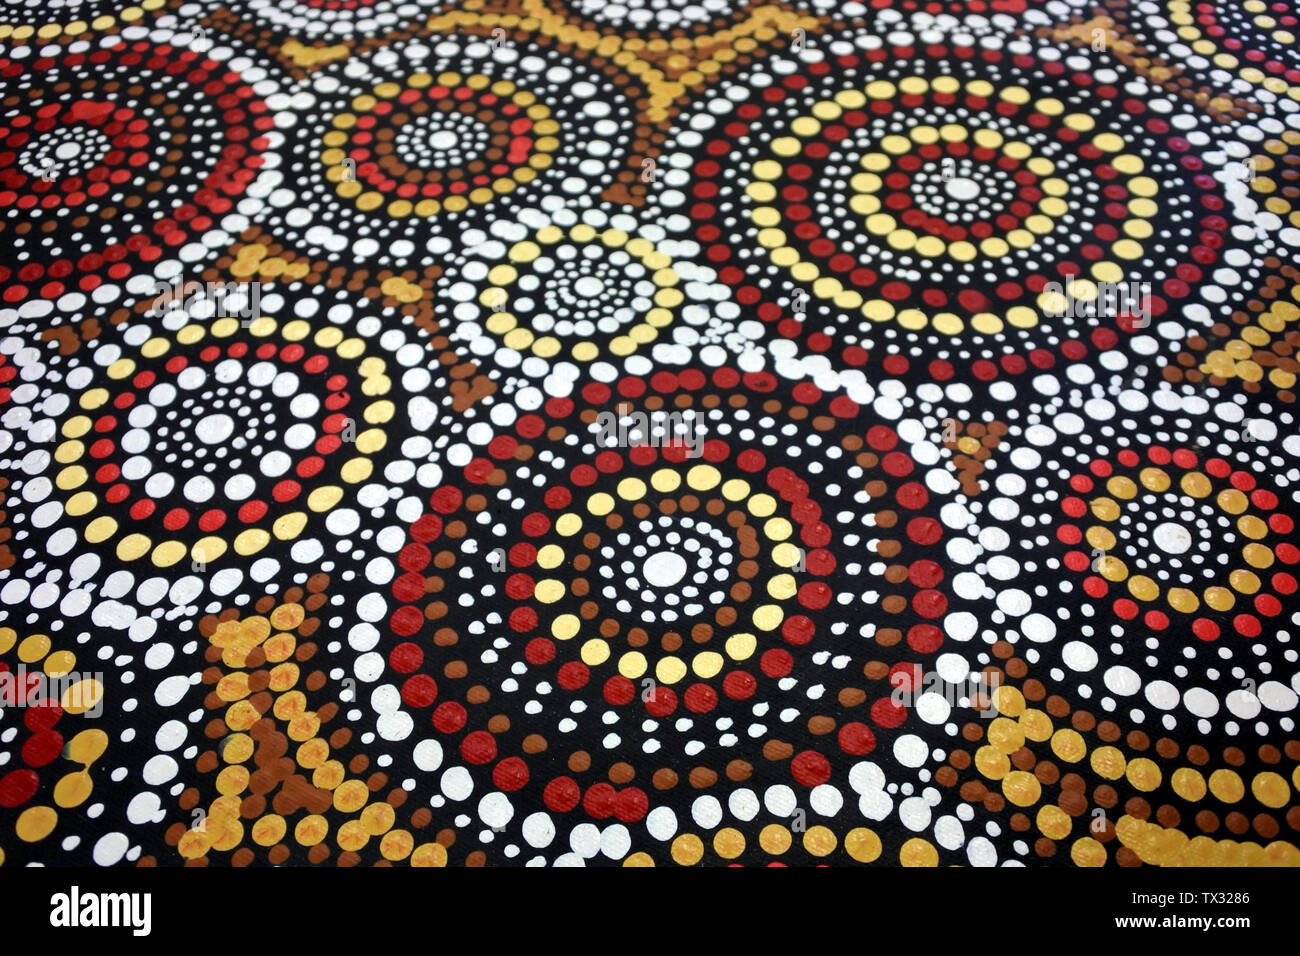 Indigenous Australian Art Dot Painting It S One Of The Oldest Traditional Form Of Art In The World Paint Marks To Te Stock Photo Alamy